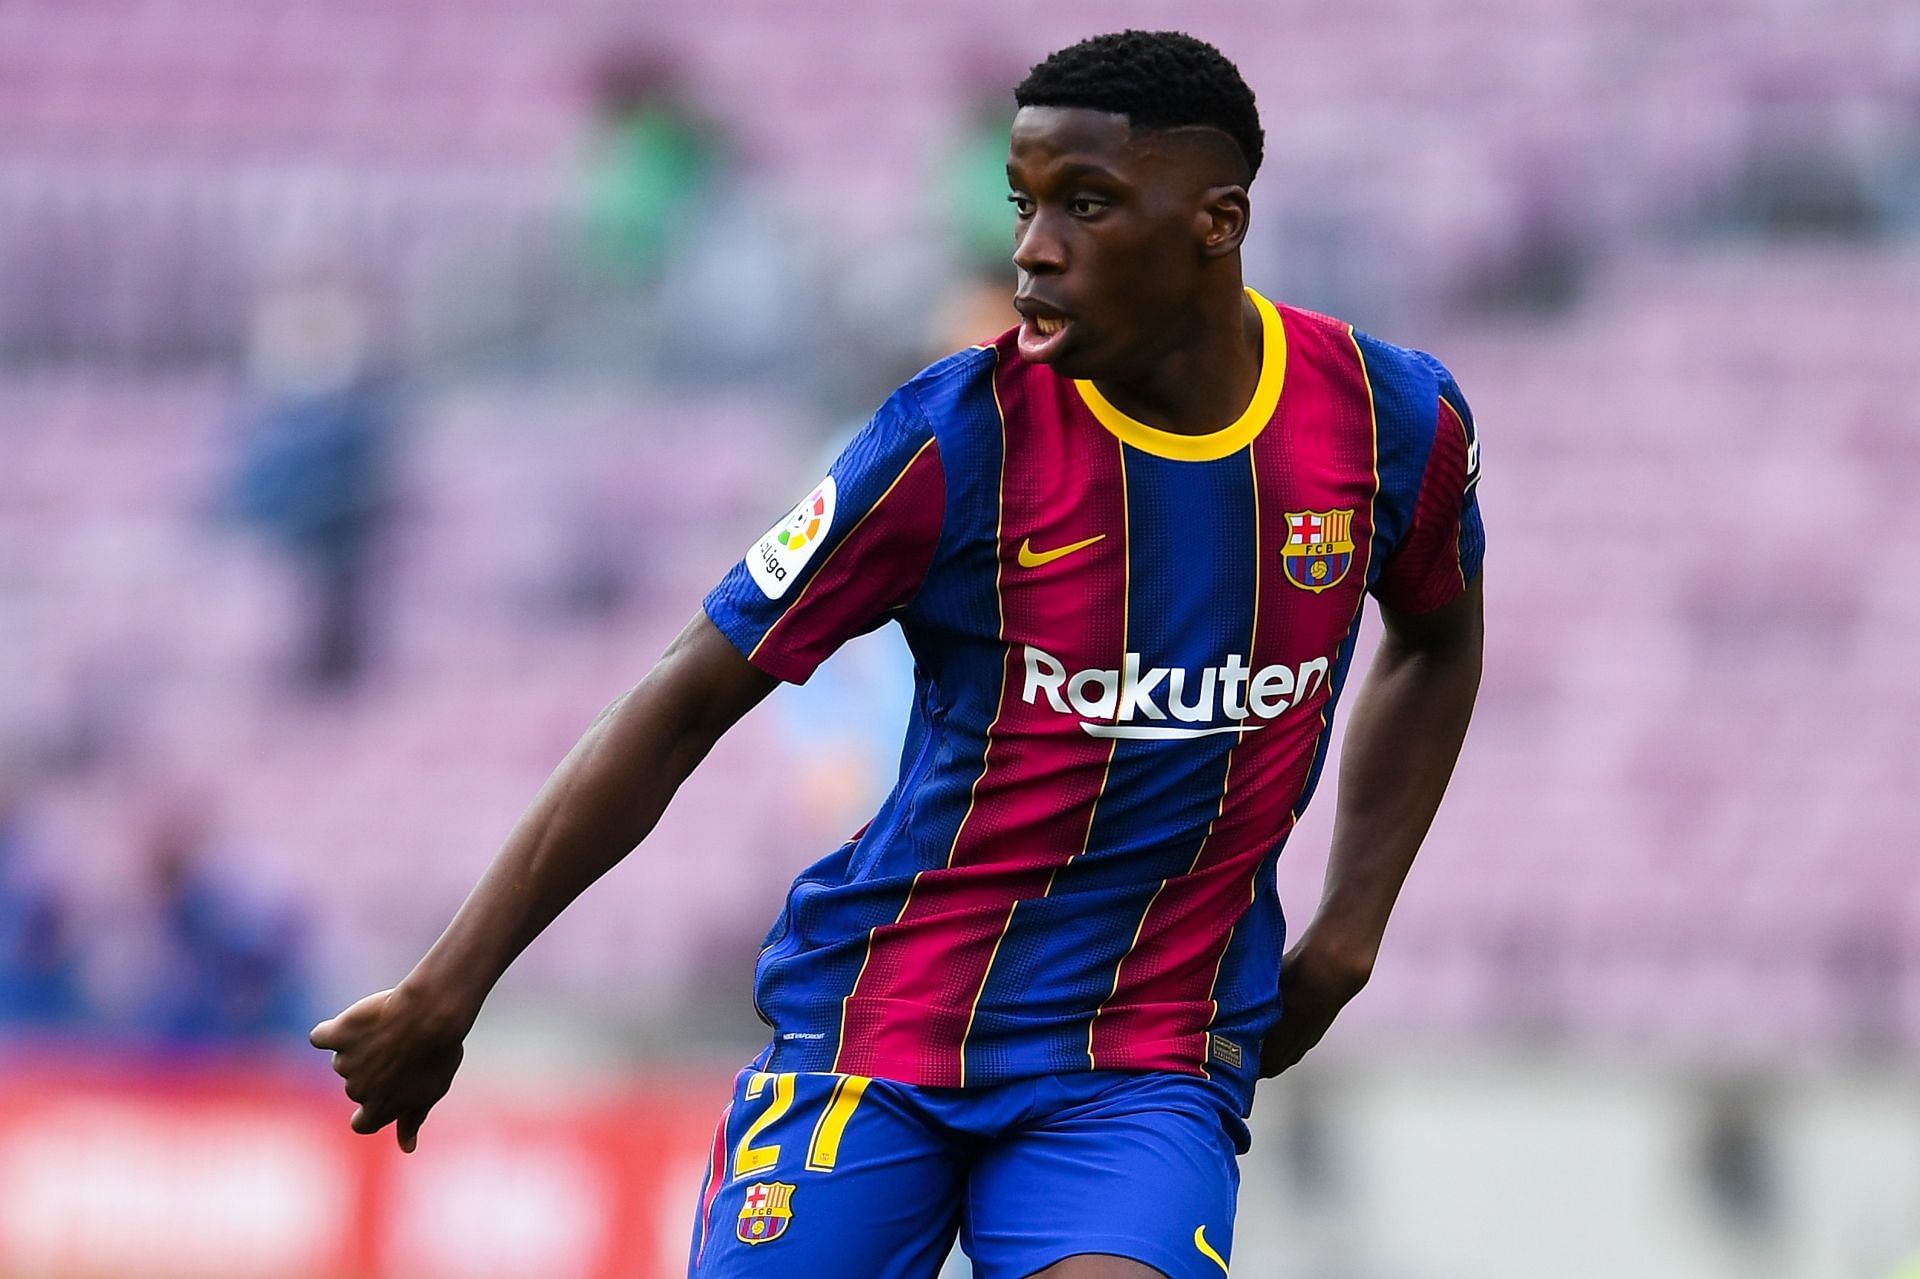 Real Madrid could sign Ilaix Moriba on loan in January.